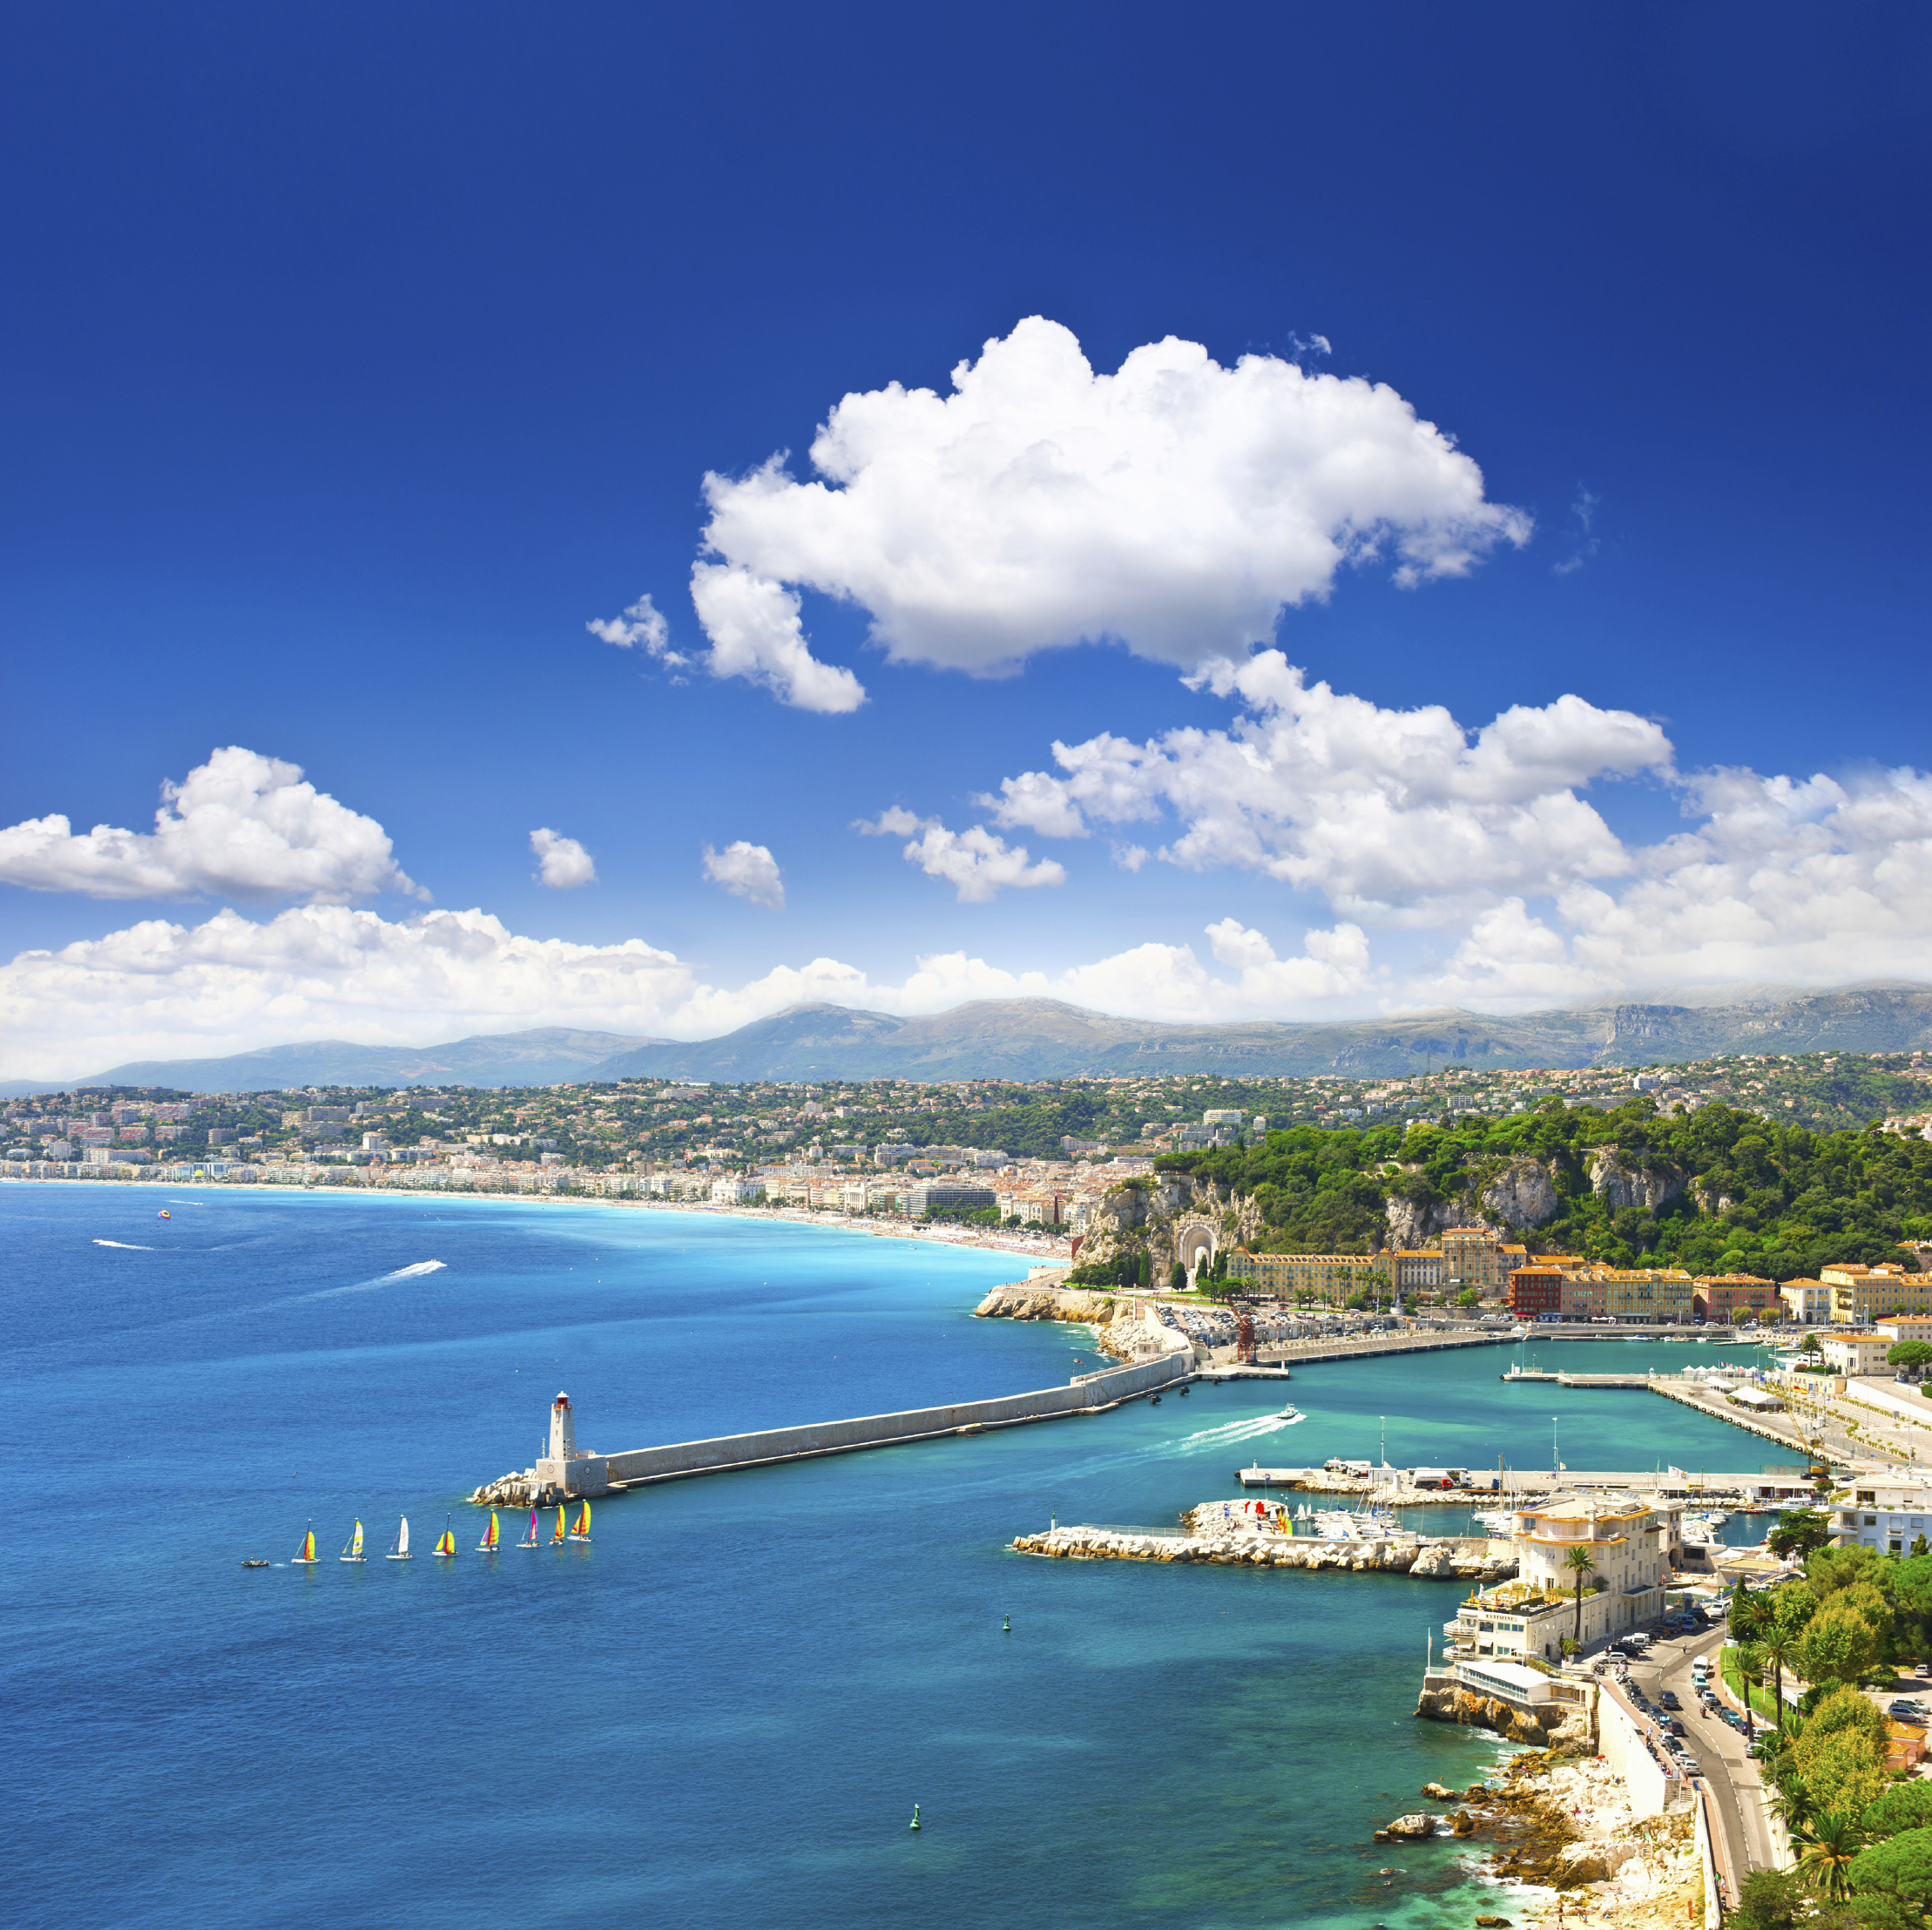 Côte d’Azur confirmed as the world’s most desirable location